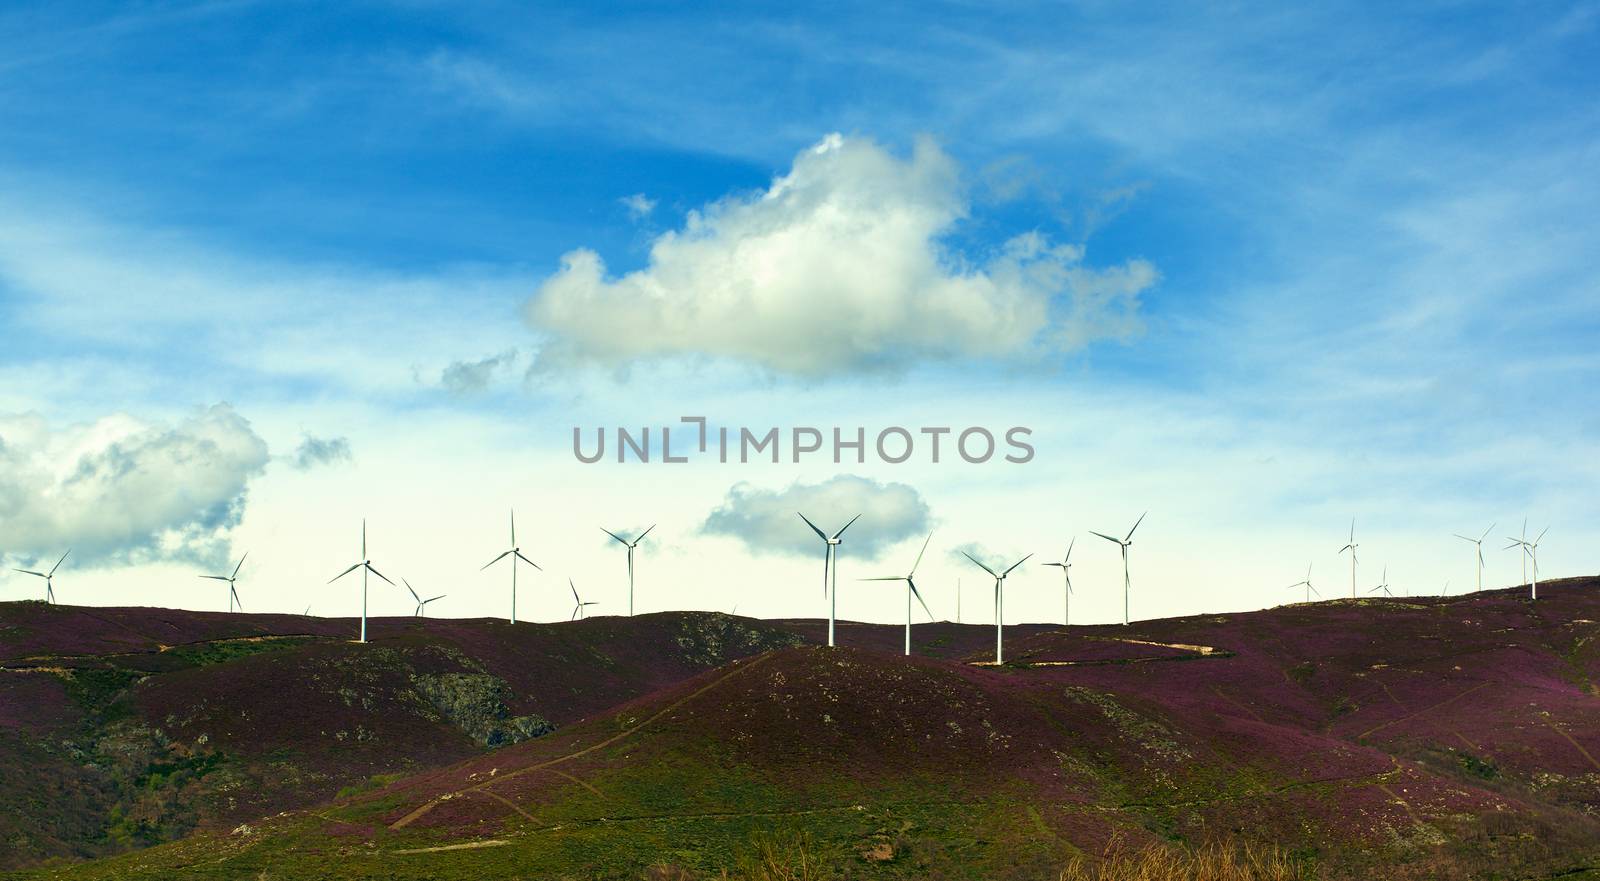 White Electrical Power Generating Wind Turbines on Lavender Hills agains Blue Sky with White Clouds background Outdoors. Castile and Leon, Spain